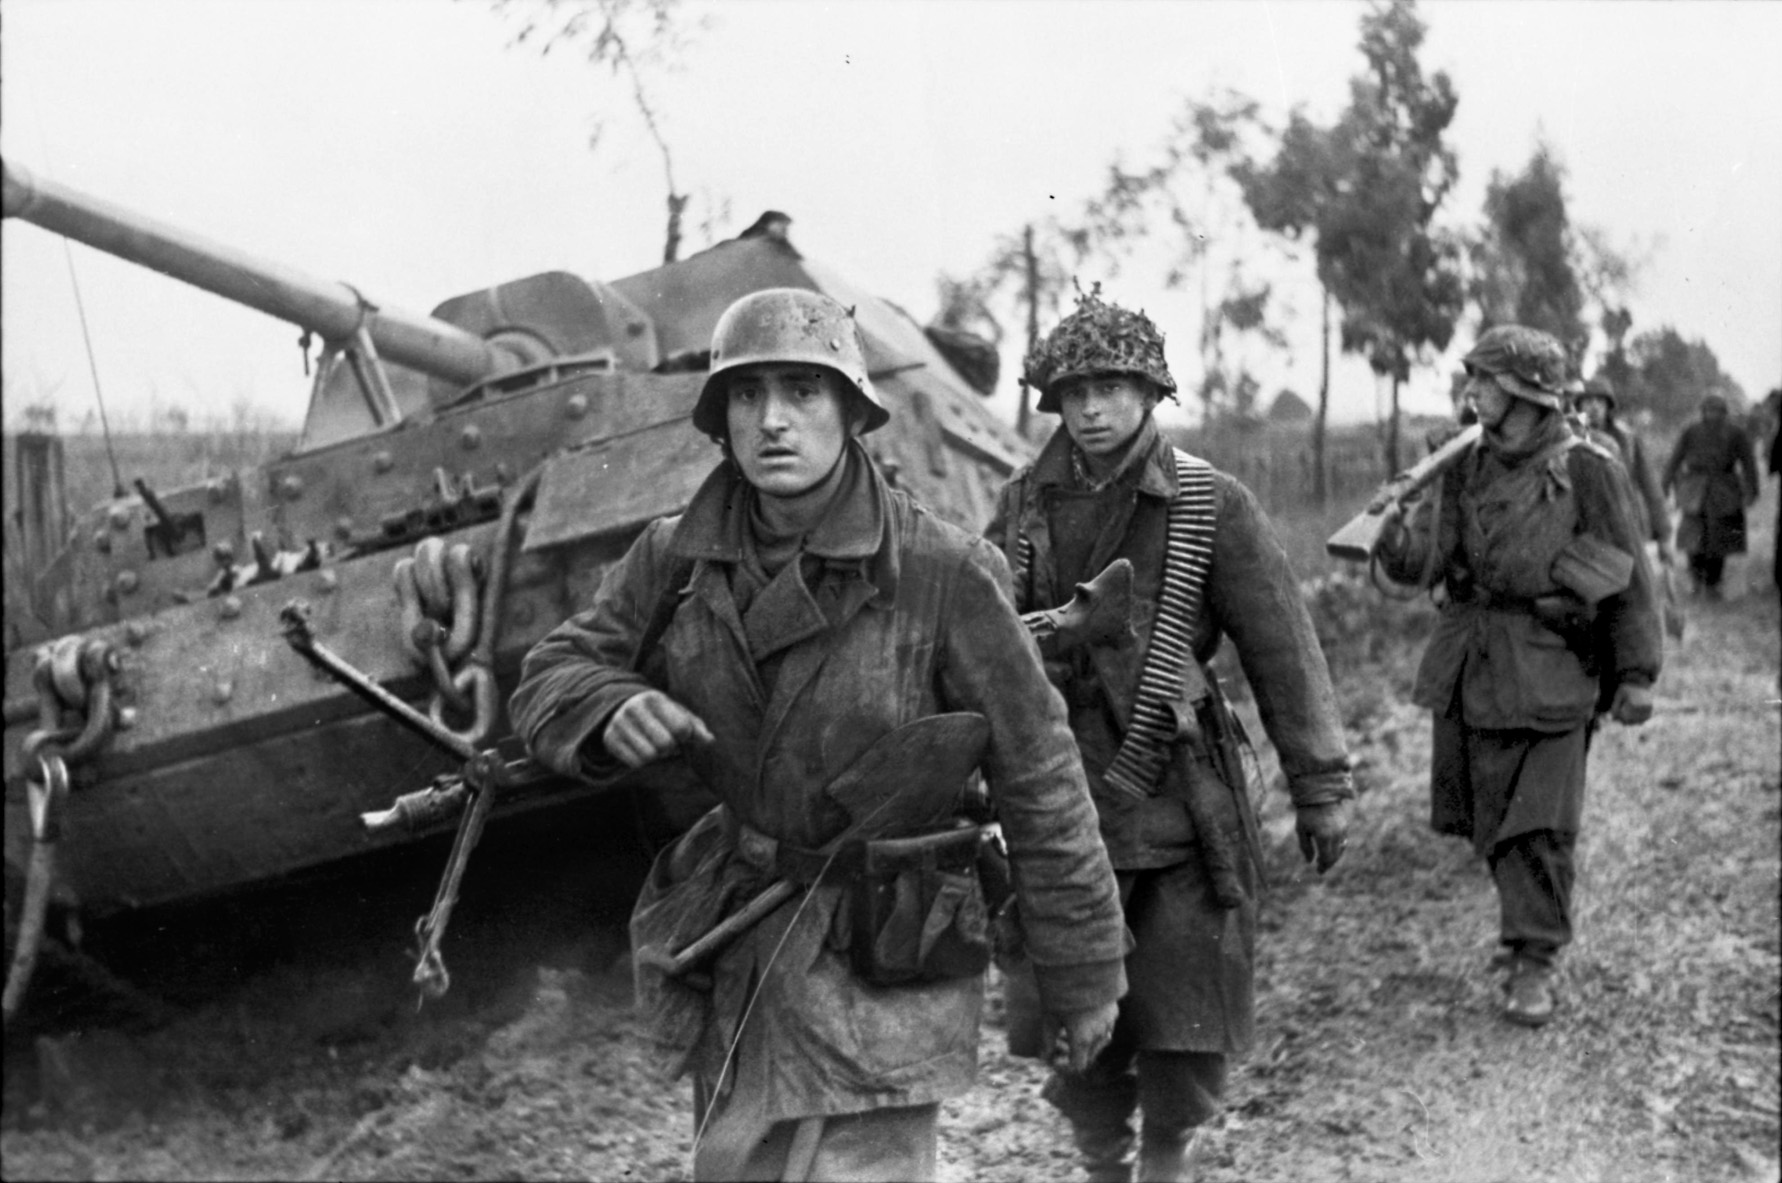 The nearby resort town of Nettuno was also a focus of the German defenses around Anzio. Although they were hit by American aircraft and artillery, German panzergrenadiers such as these moved forward to stall the Allied drive on Rome. 